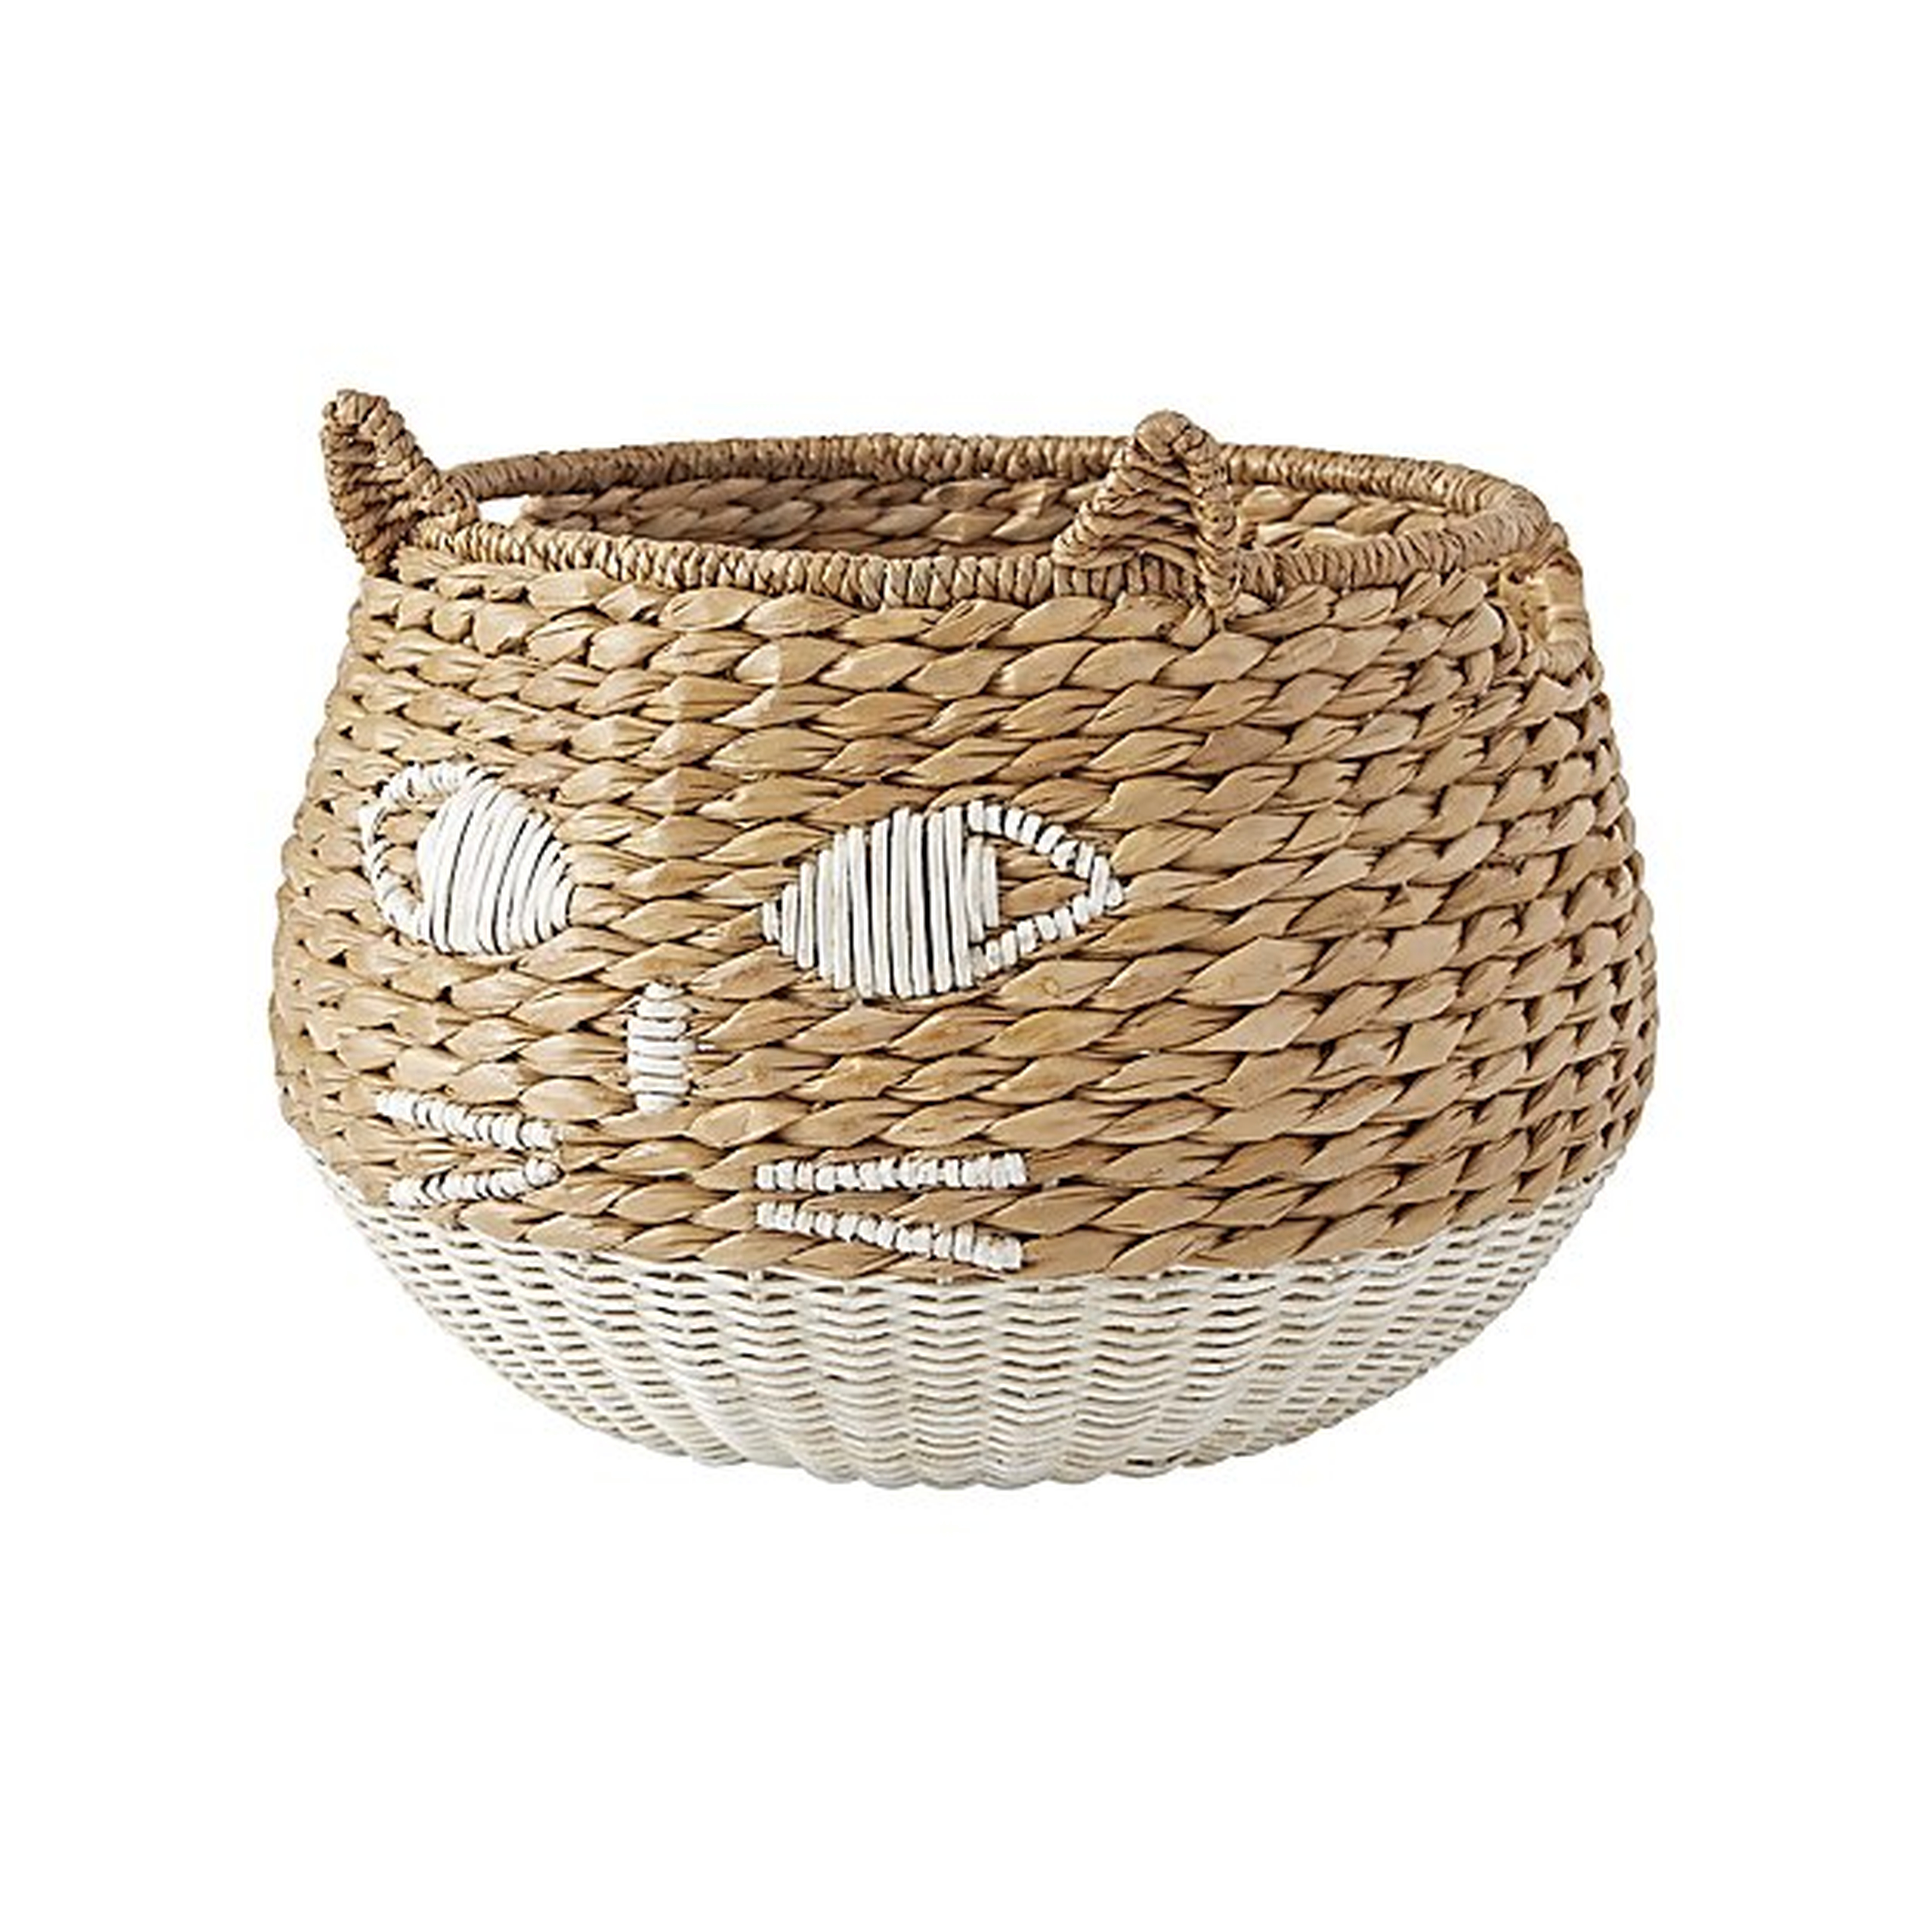 Woven Cat Basket - Crate and Barrel